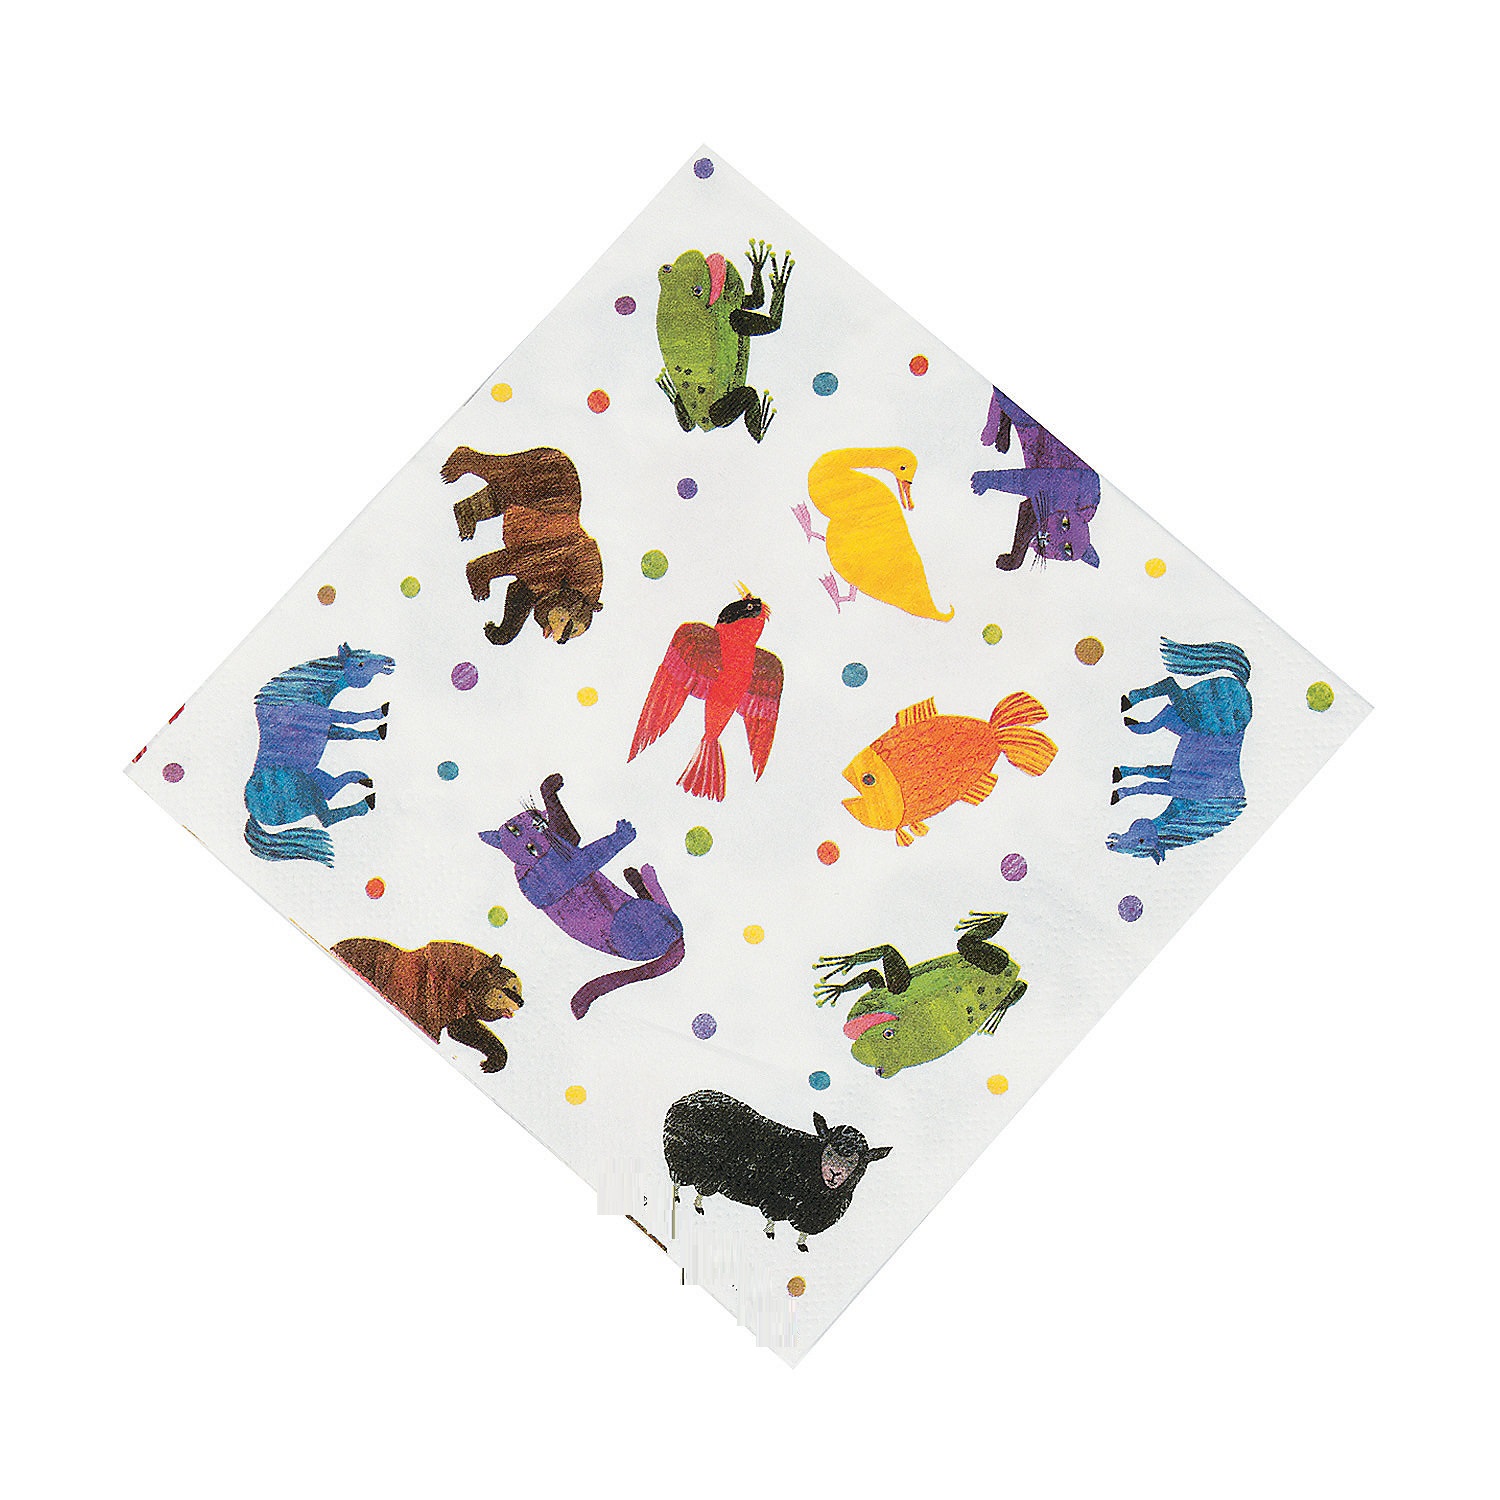 eric-carle-s-brown-bear-brown-bear-what-do-you-see-luncheon-napkins-16-pc-_13721252